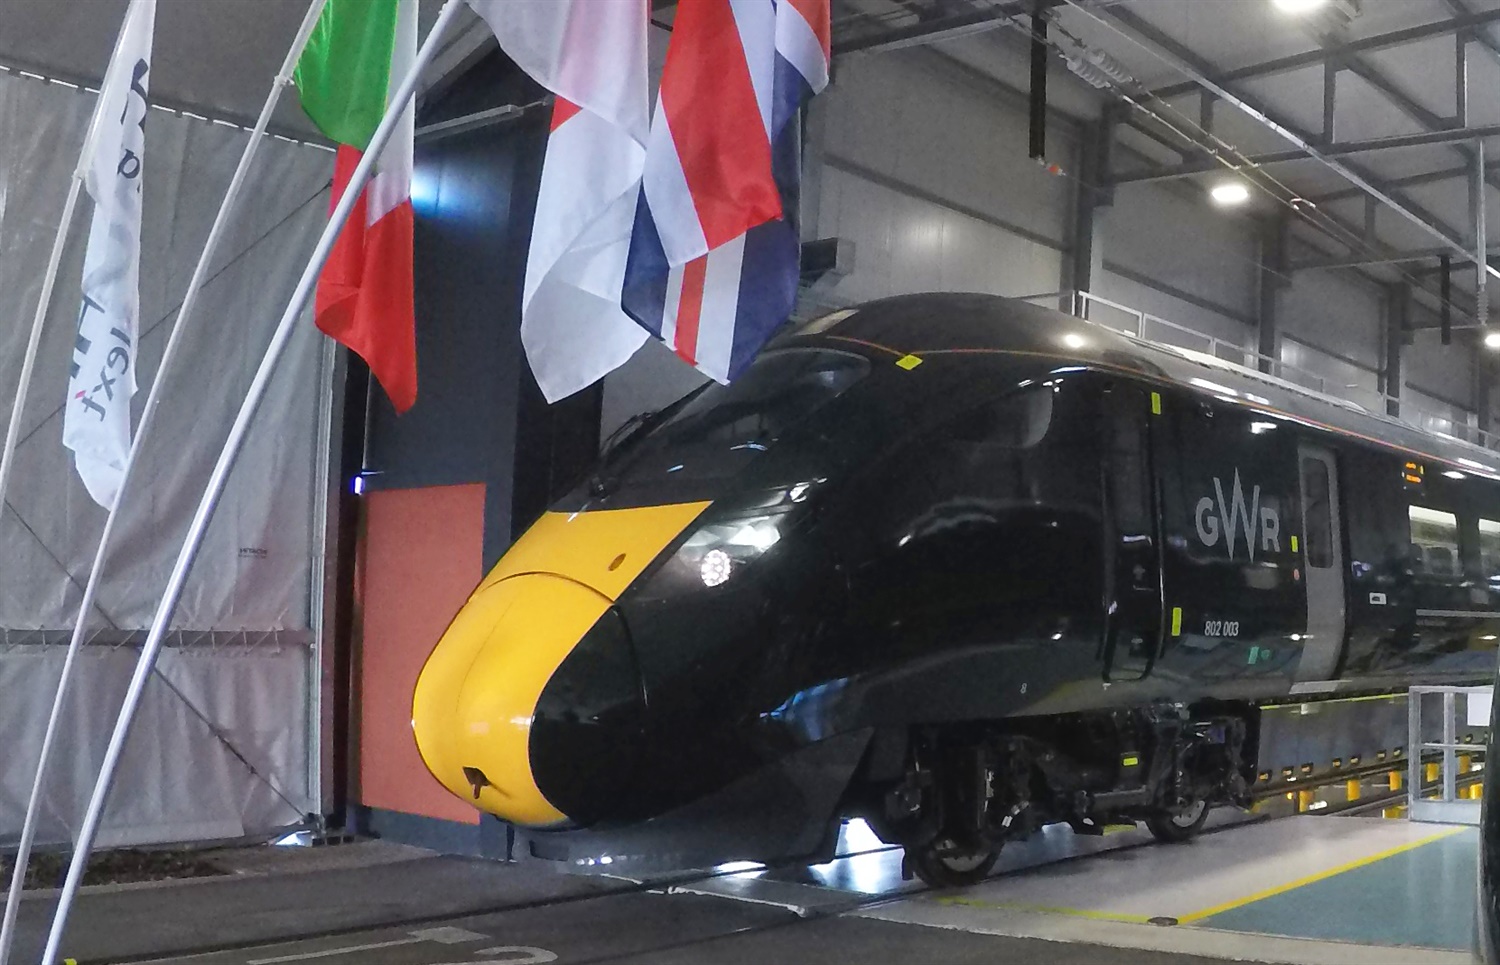 New GWR Class 802 IETs leave Italy bound for Devon and Cornwall